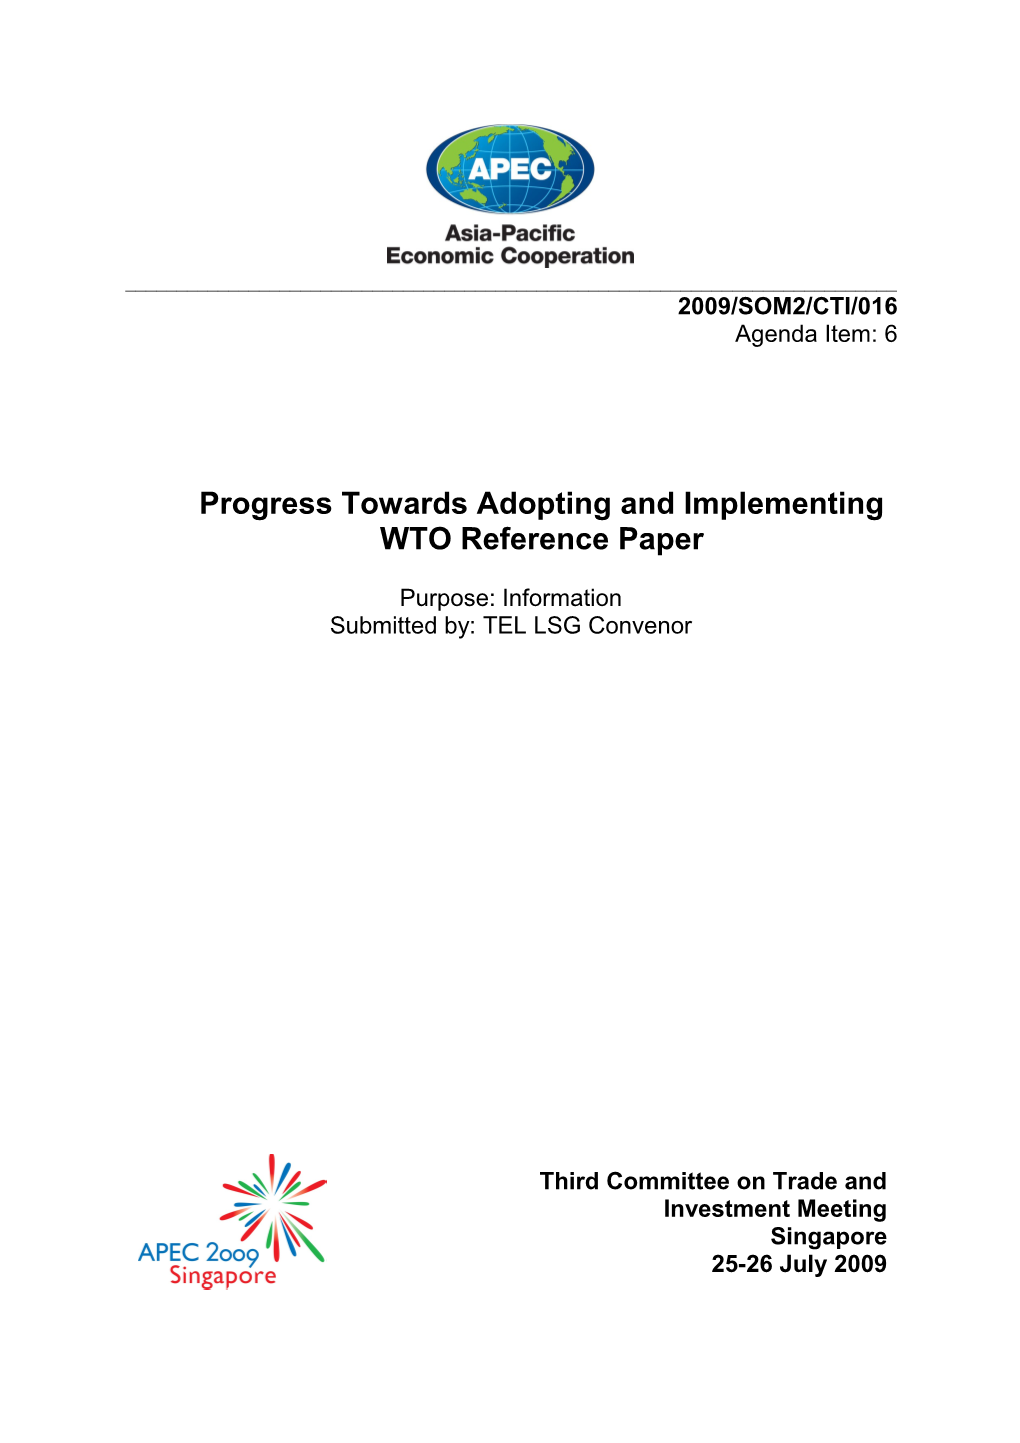 Progress Towards Adopting and Implementing WTO Reference Paper